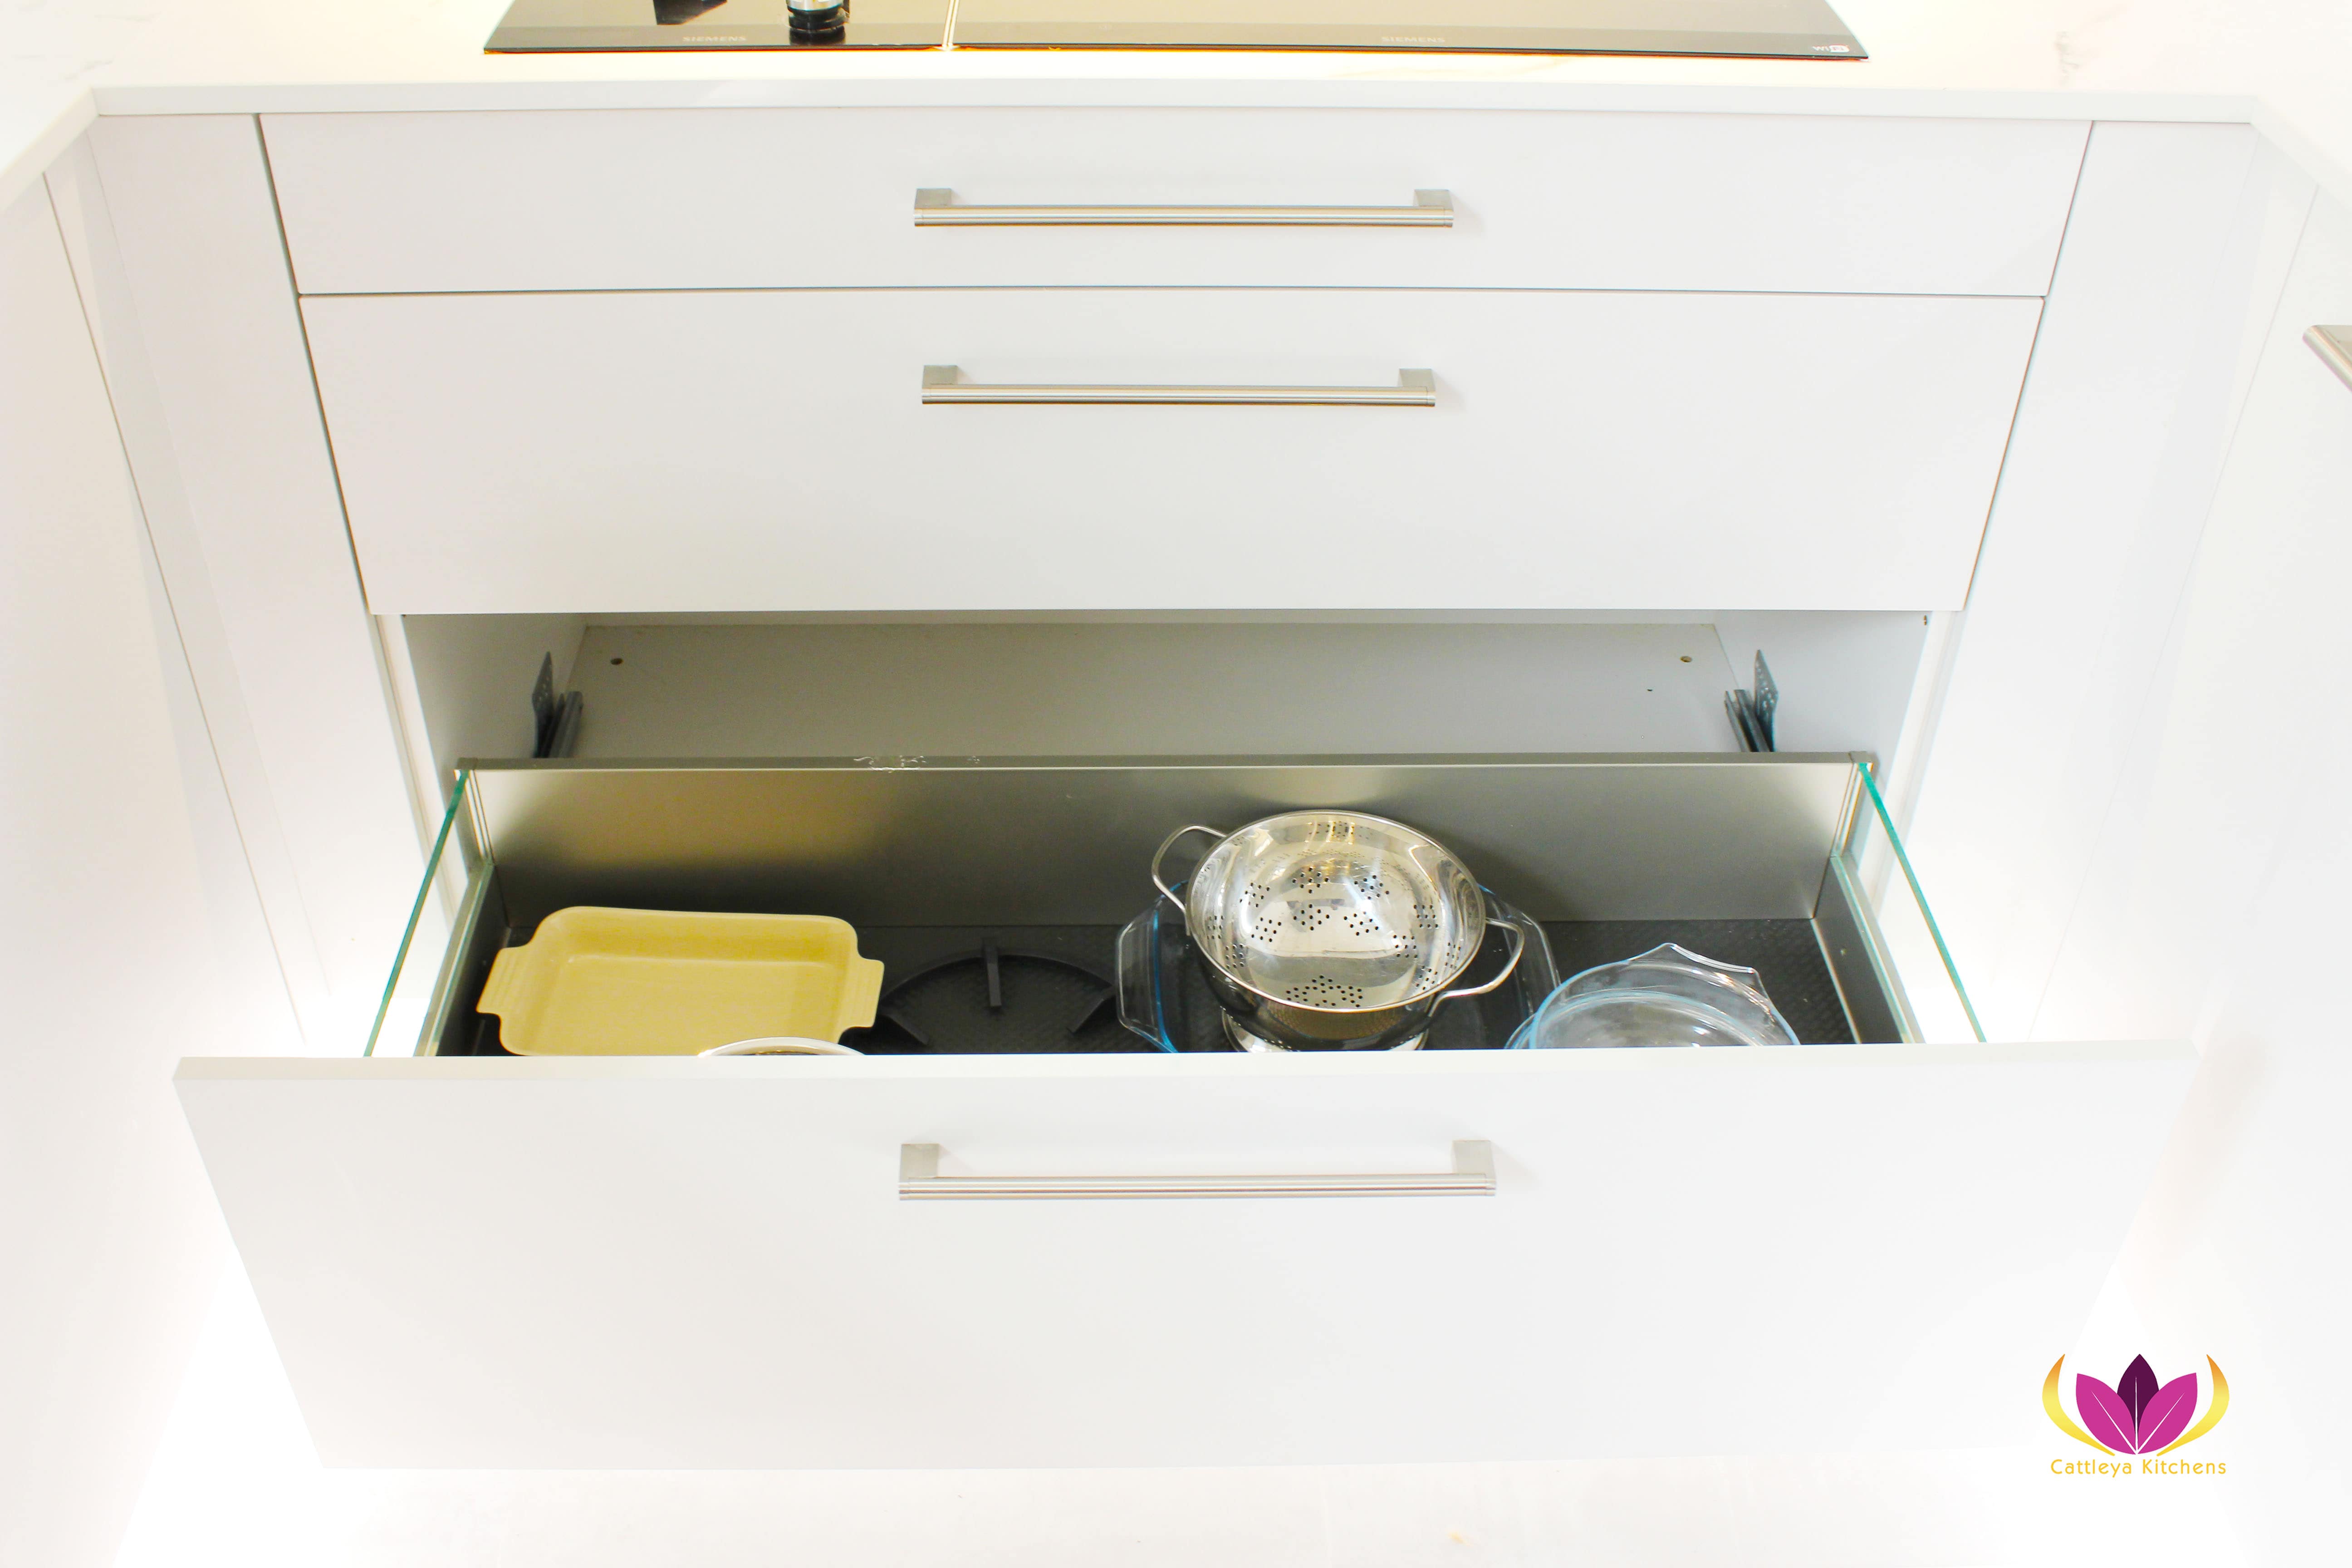 Drawers with glass side panel - Belsize Park Finished Kitchen Project